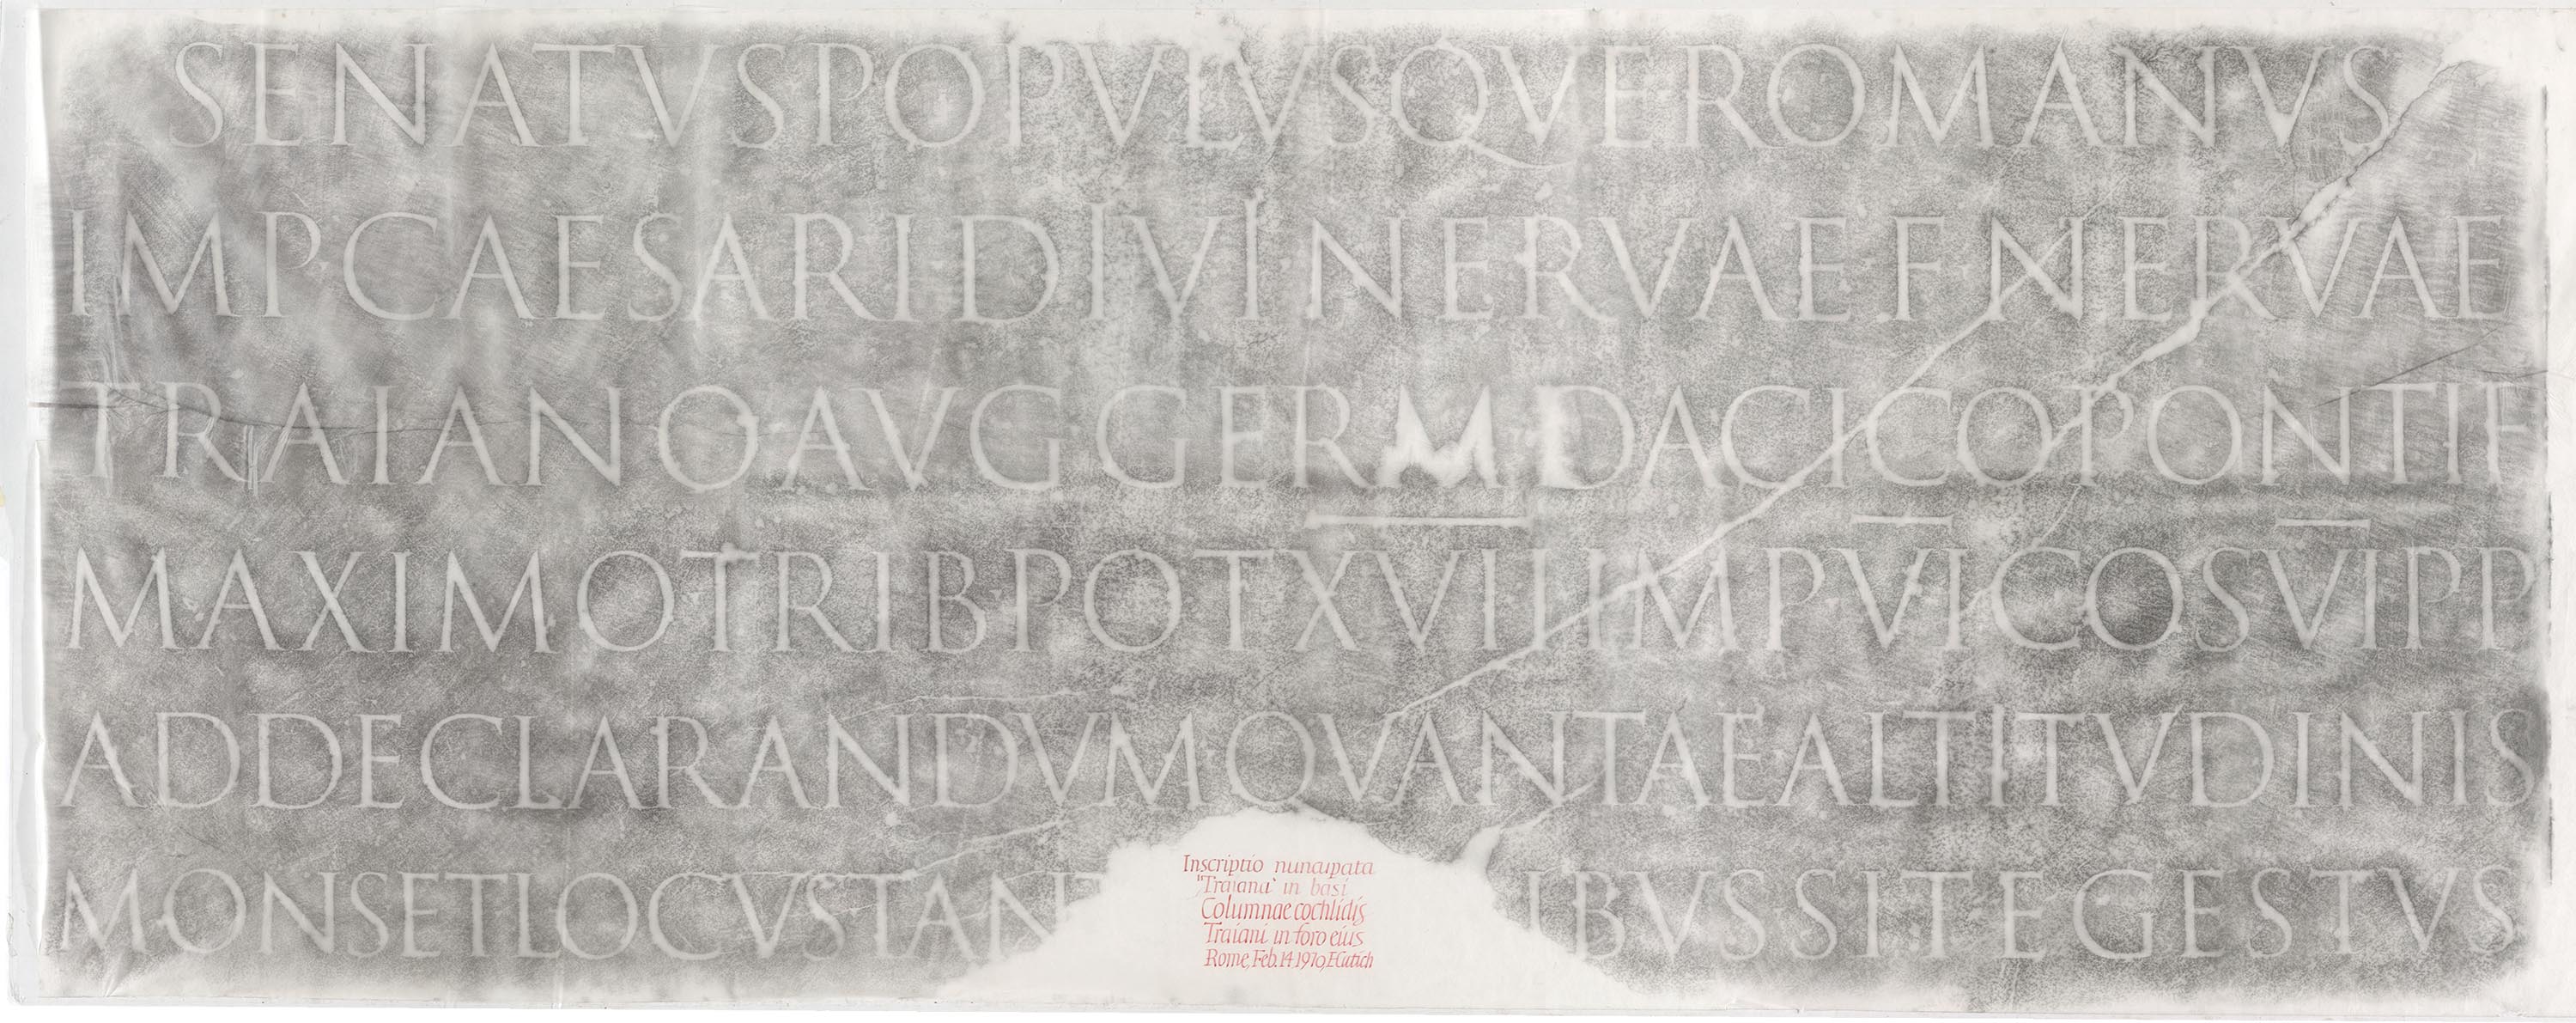 Rubbing of Trajan stone inscription by Edward Catich. Images provided by Julian Waters.